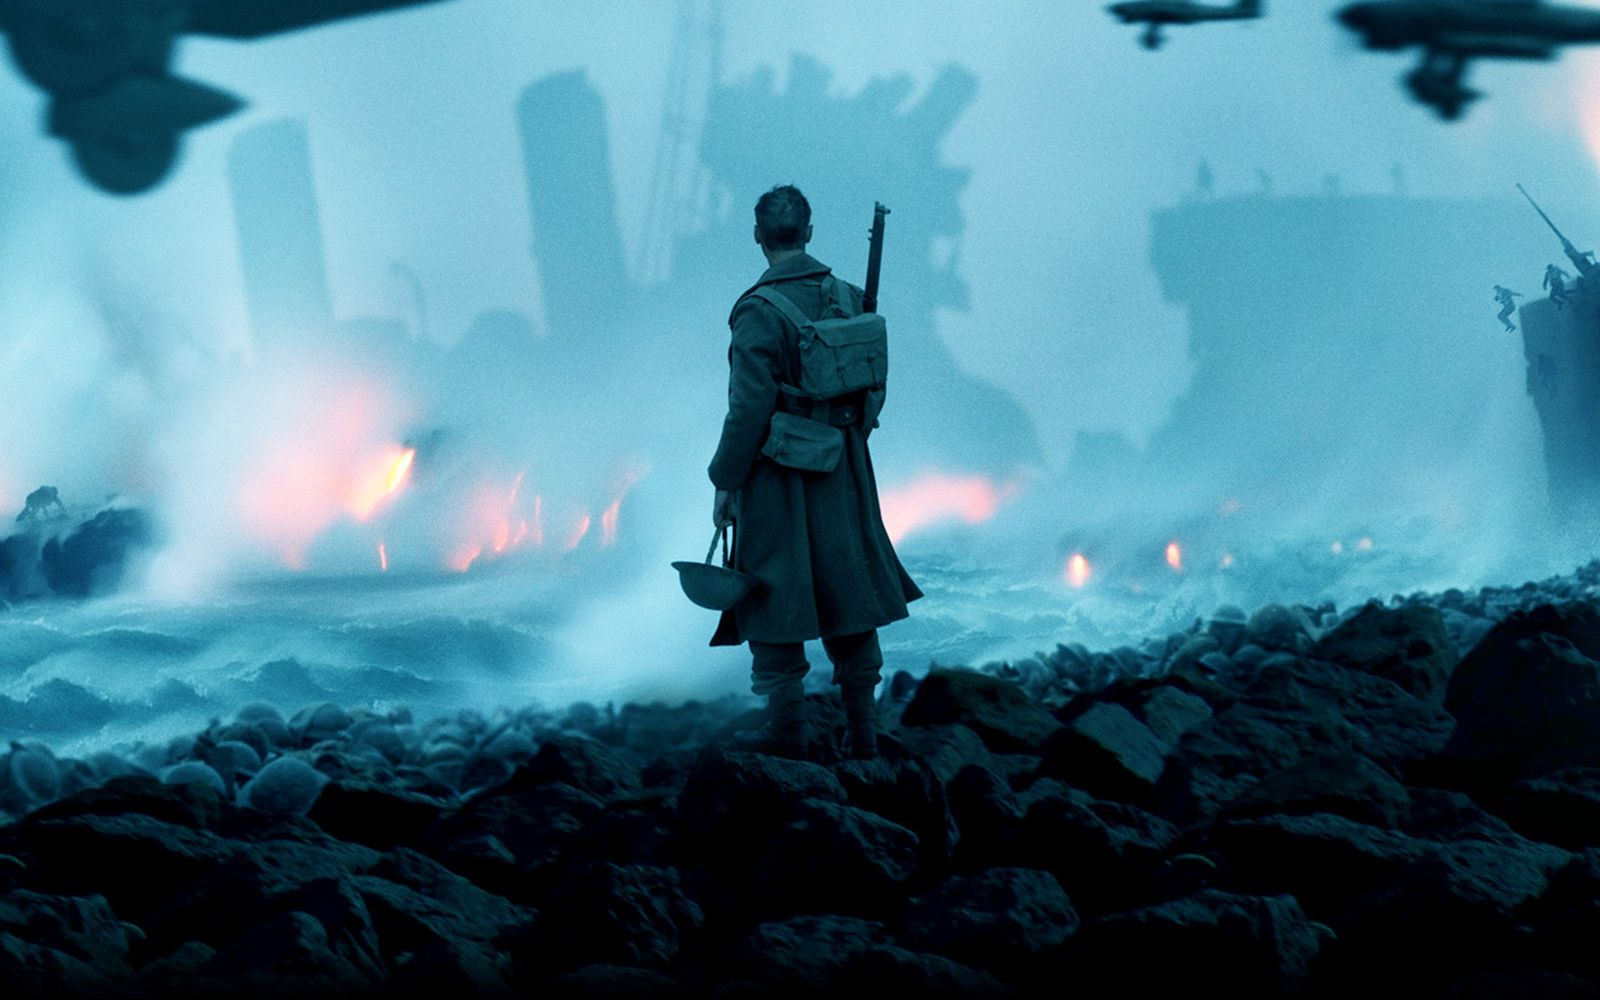 'Dunkirk' Flies High In China With 30 million Dollars On Its Premiere.